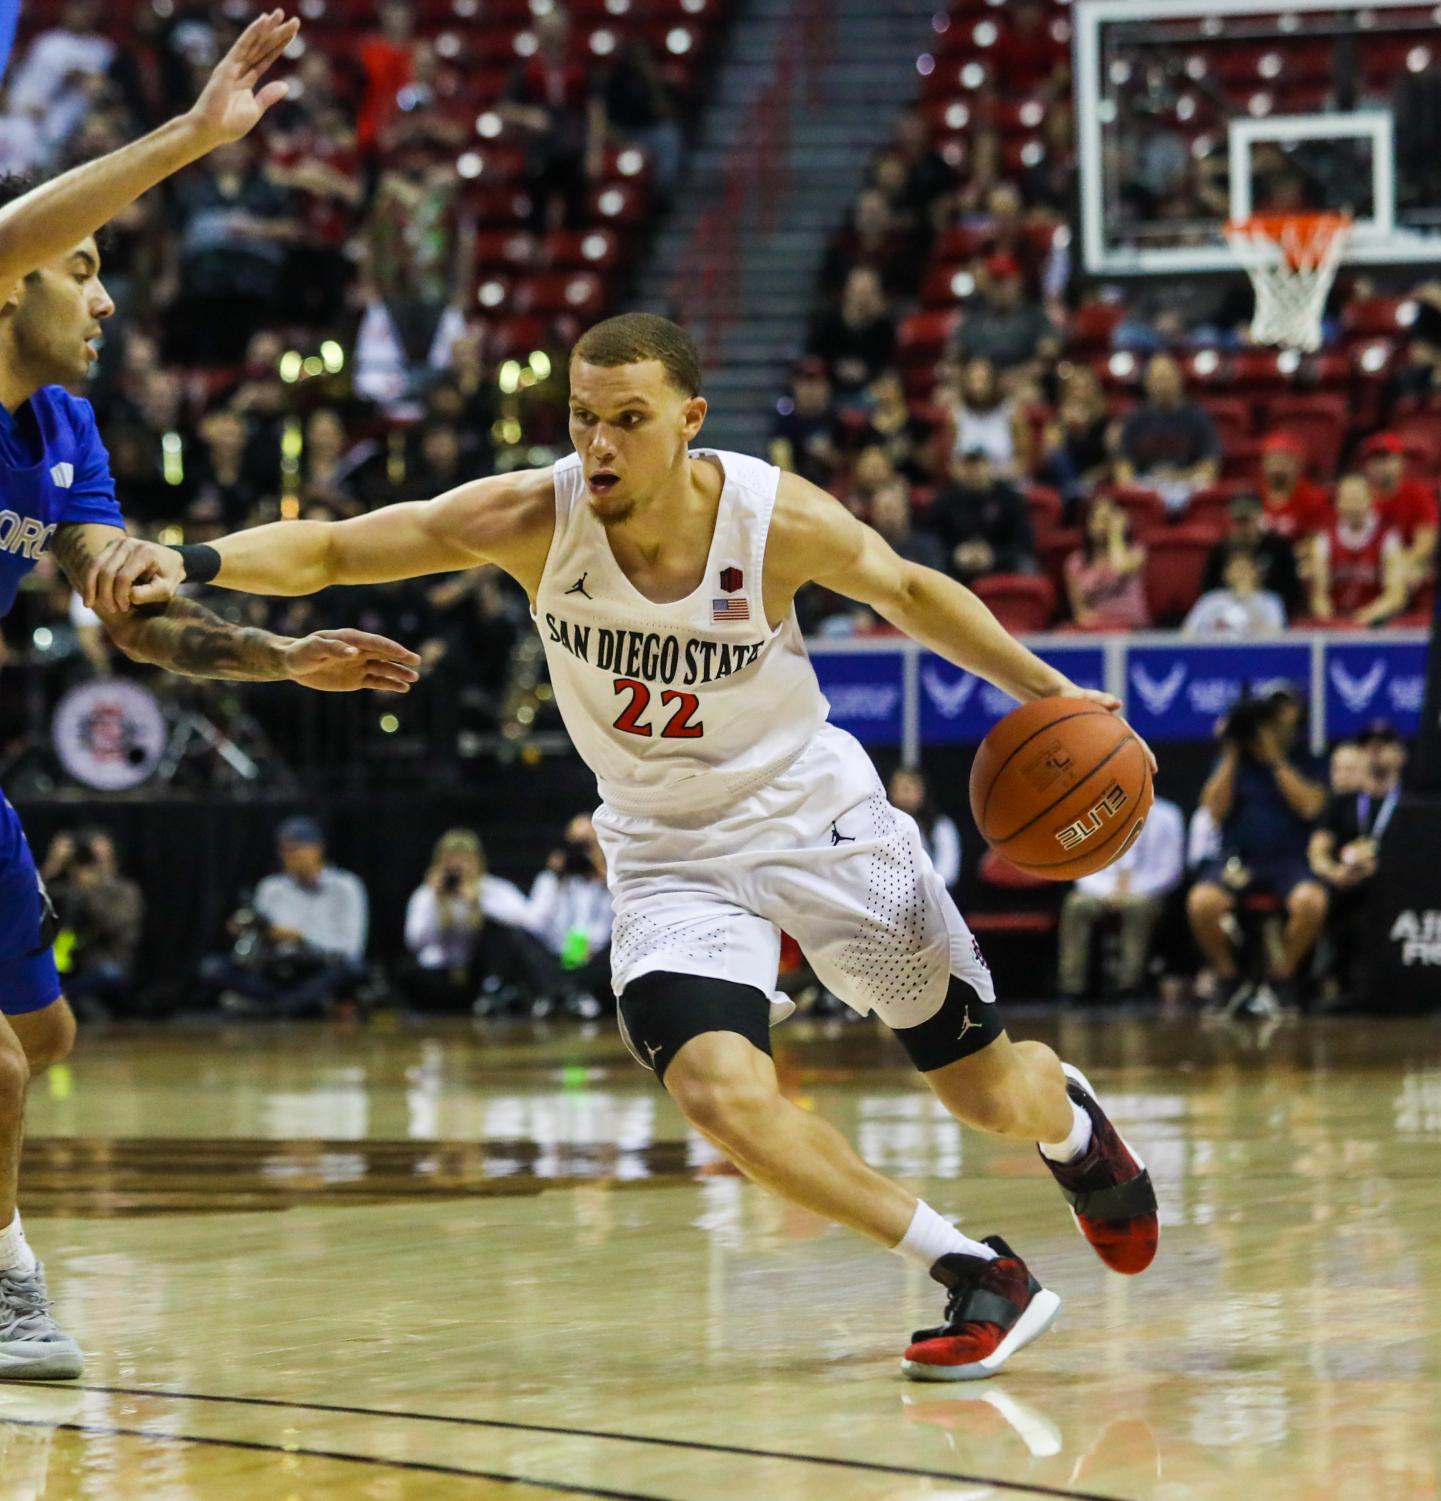 Now that Aztecs have transfer Malachi Flynn, who might they get